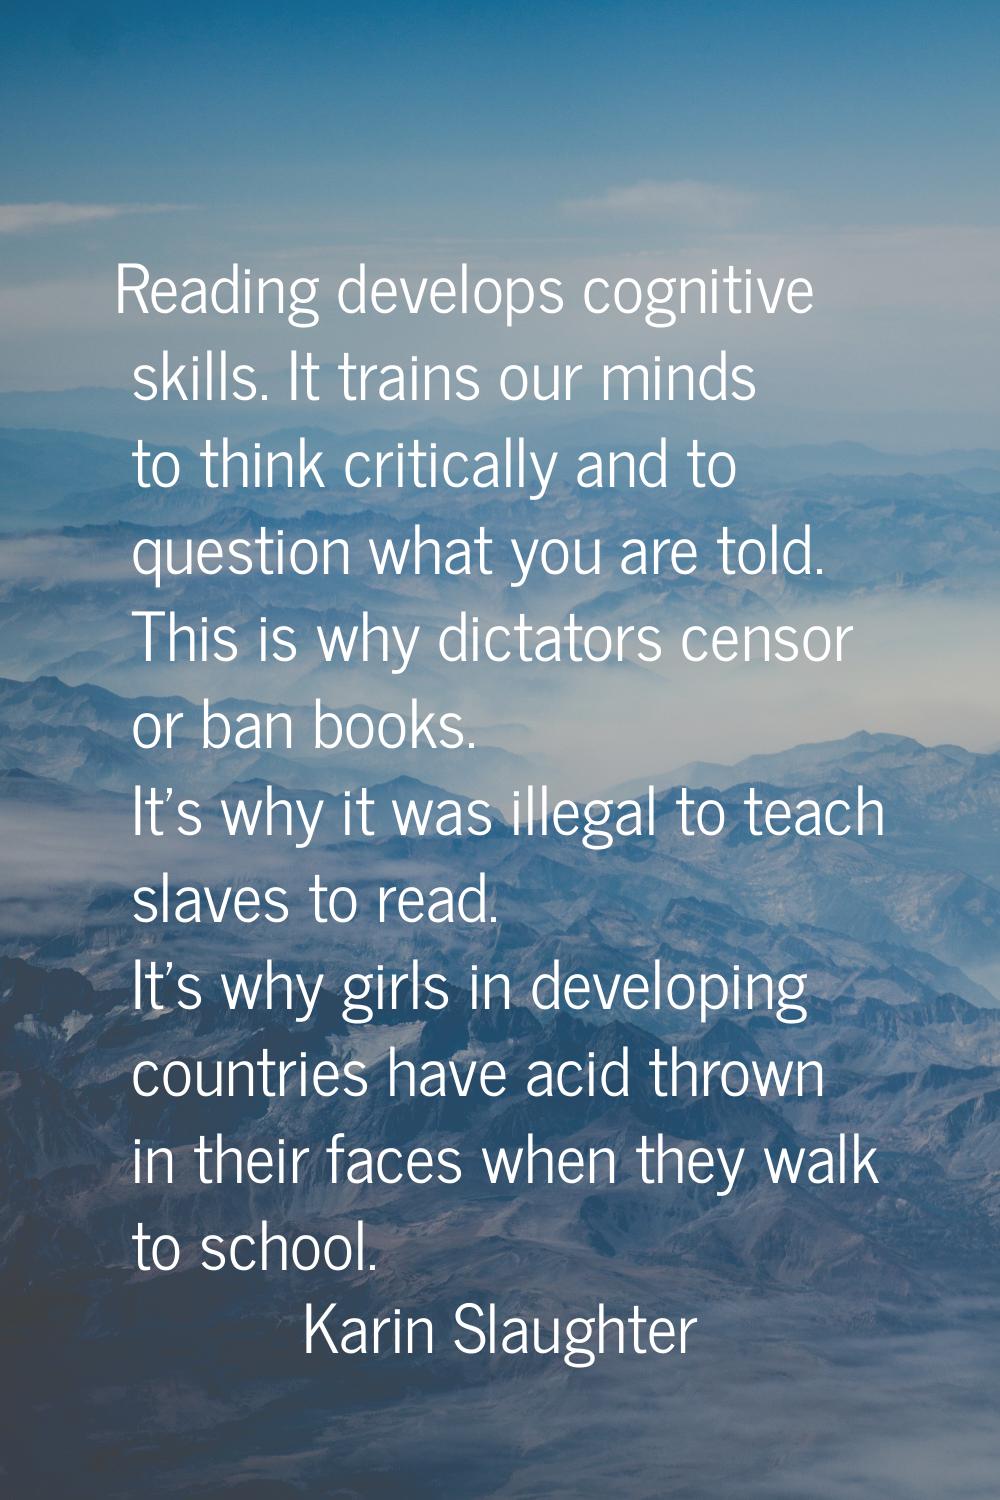 Reading develops cognitive skills. It trains our minds to think critically and to question what you